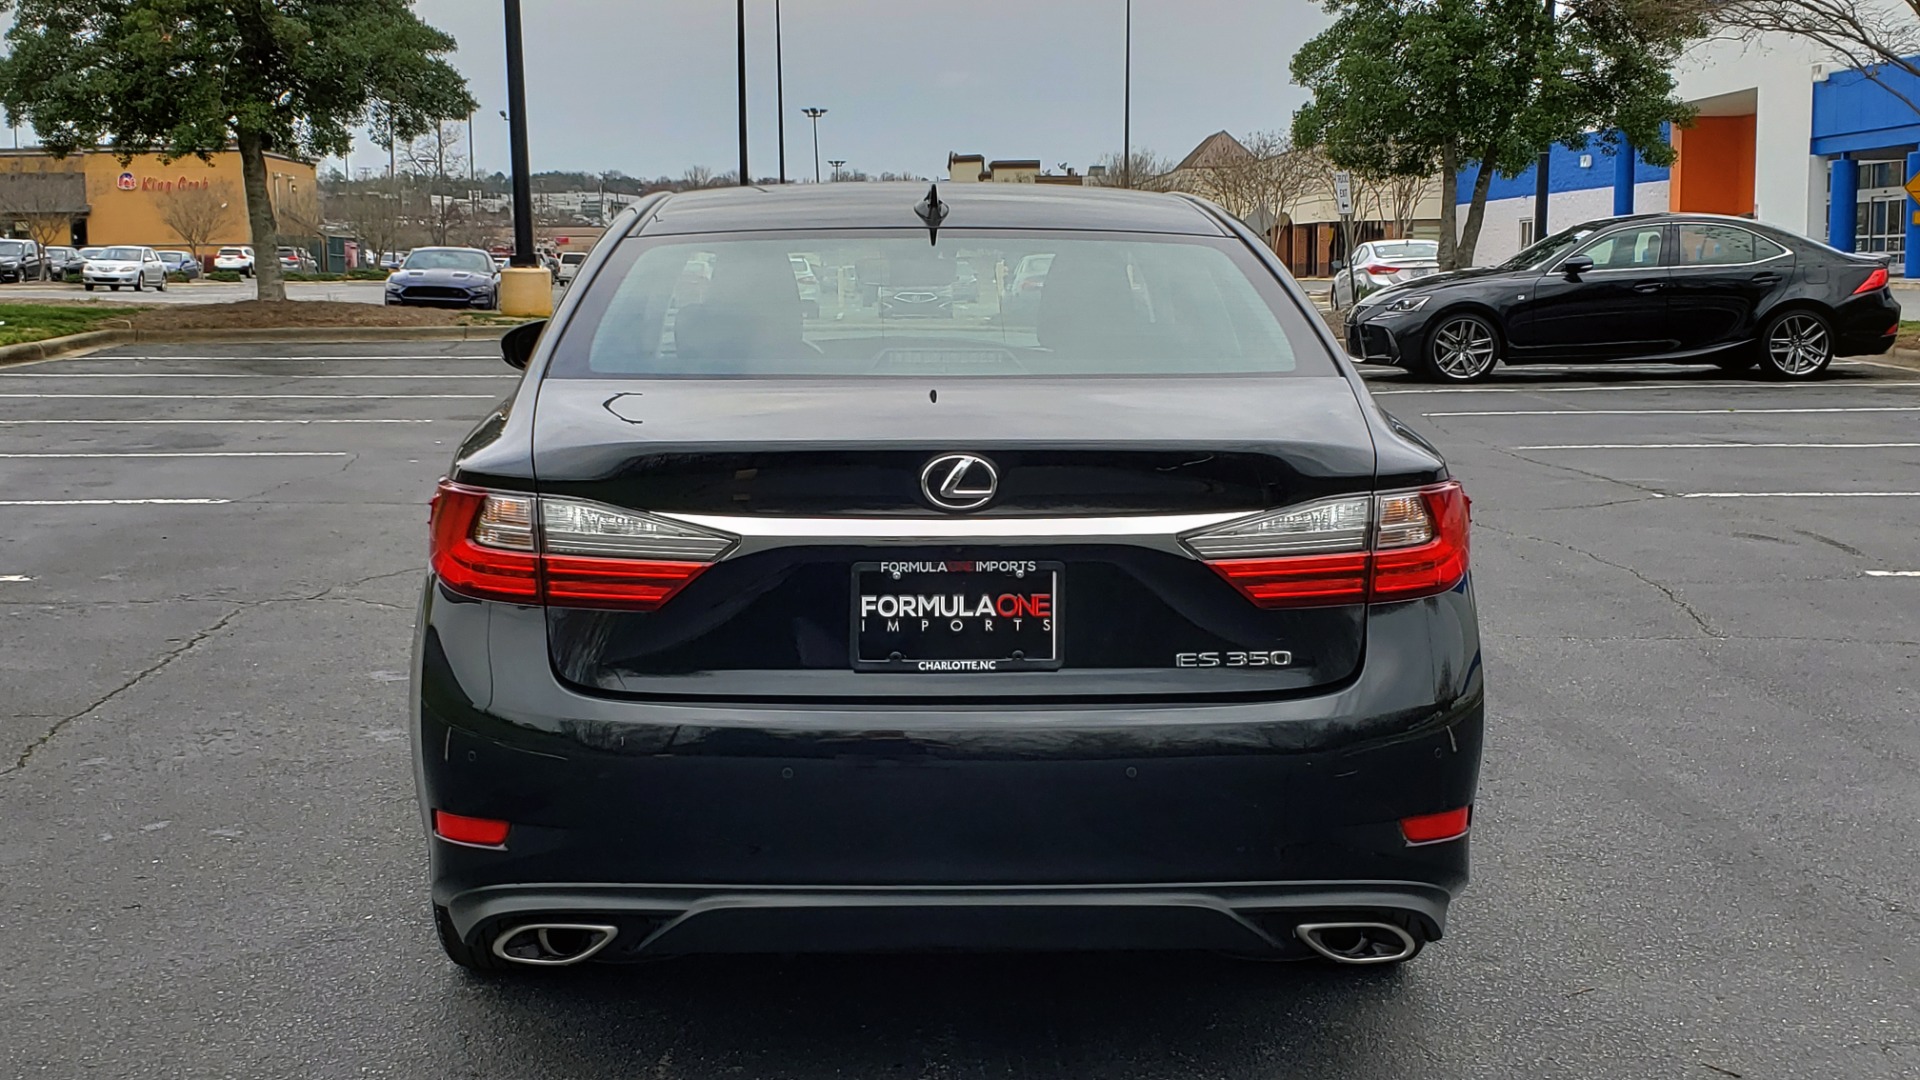 Used 2017 Lexus ES 350 PREMIUM / SUNROOF / PARK ASST / BSM / VENT SEATS / REARVIEW for sale Sold at Formula Imports in Charlotte NC 28227 18